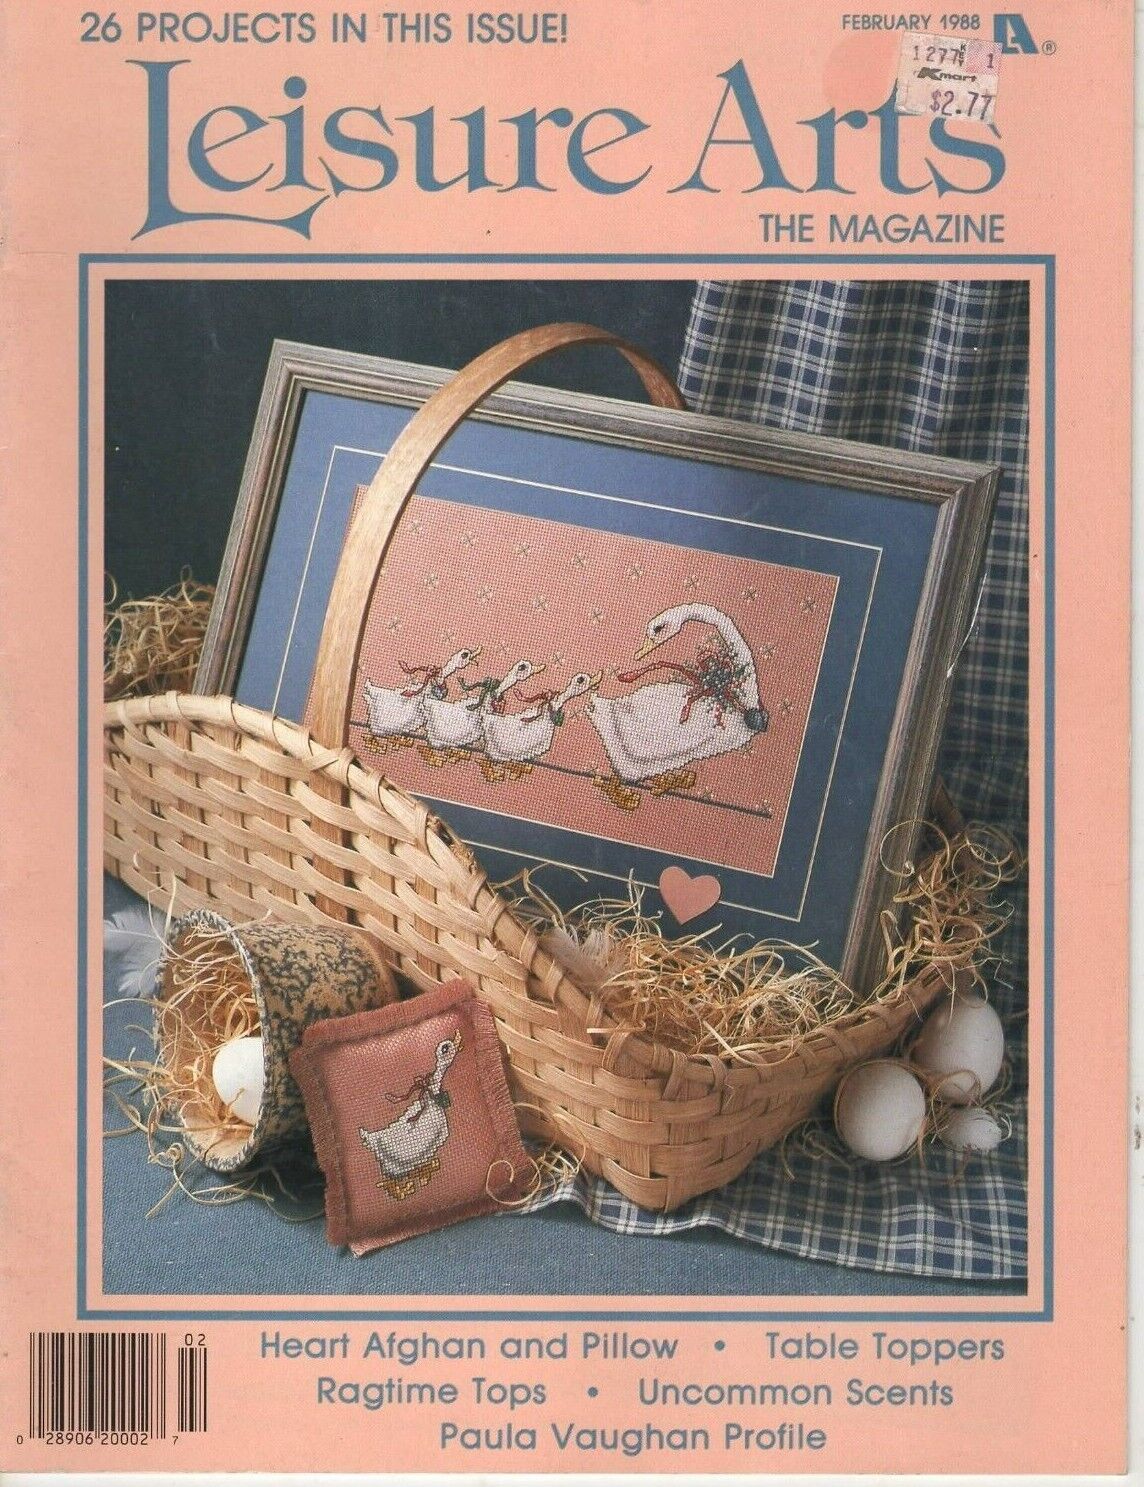 Primary image for Leisure Arts The Magazine Feb 1988 - Cross Stitch, Knit, Crochet Patterns